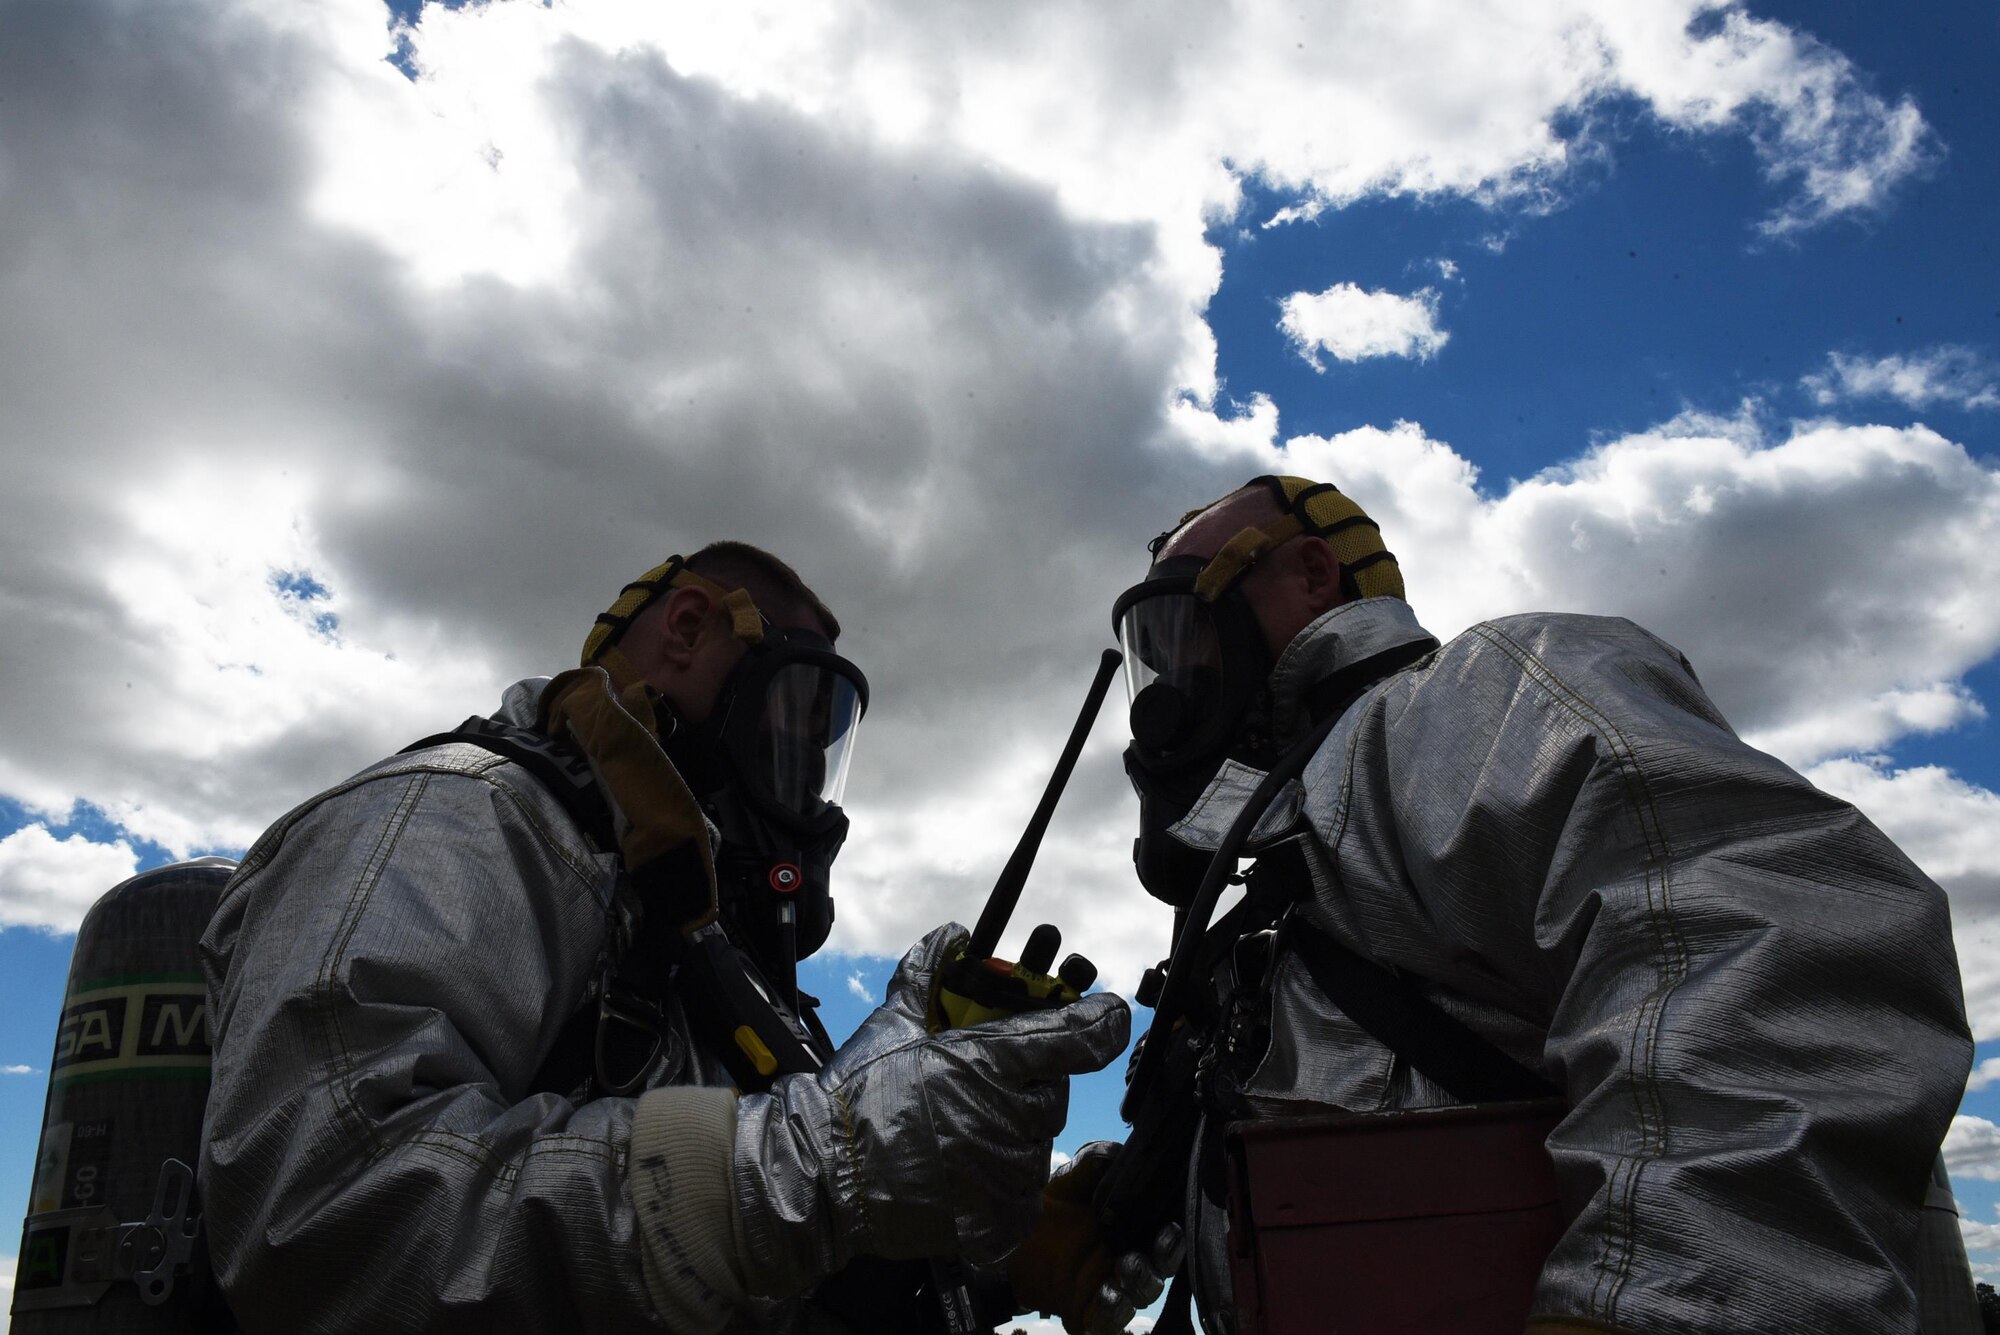 Members of the 19th Civil Engineer Squadron Explosive Ordnance Disposal flight, dispose of simulated flares during a major accident response inspection March 30, 2017, at the Jacksonville Fire Department Training Center, Ark. The 19th, 314th and 189th Airlift Wings along with the 913th Airlift Group participated in the exercise to test emergency first responders. (U.S. Air Force photo by Airman 1st Class Kevin Sommer Giron)